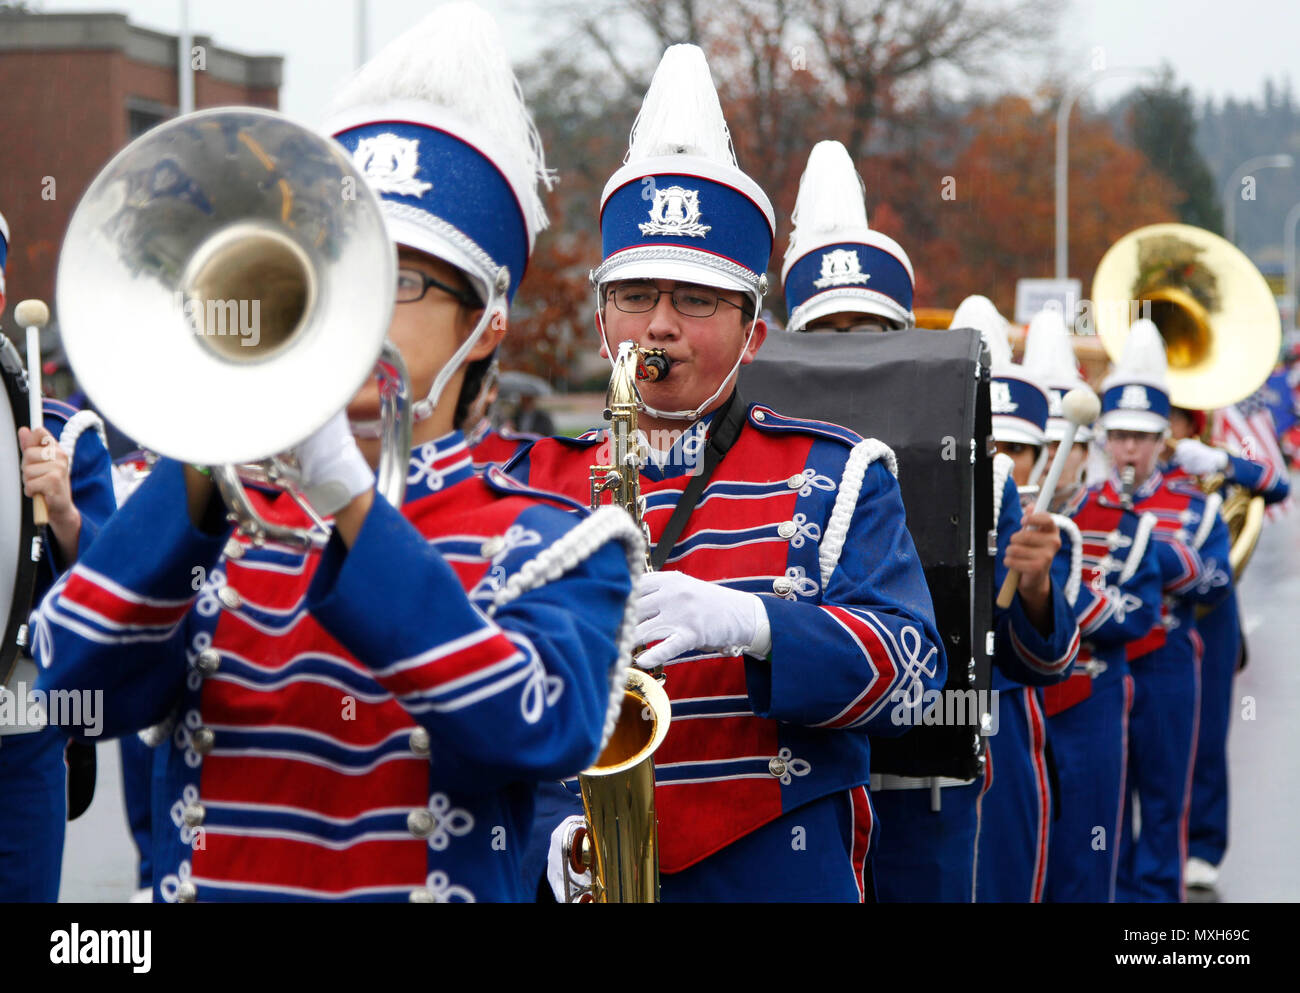 Twenty-six high school marching bands from across the state of Washington brought music for the 51st annual Auburn Veterans Day Parade Nov. 5, 2016. The Auburn Veterans Day Parade is one of the oldest and largest parades in the United States paying tribute to current military members and veterans. (U.S. Army photo by Spc. Sarah K. Anwar) Stock Photo